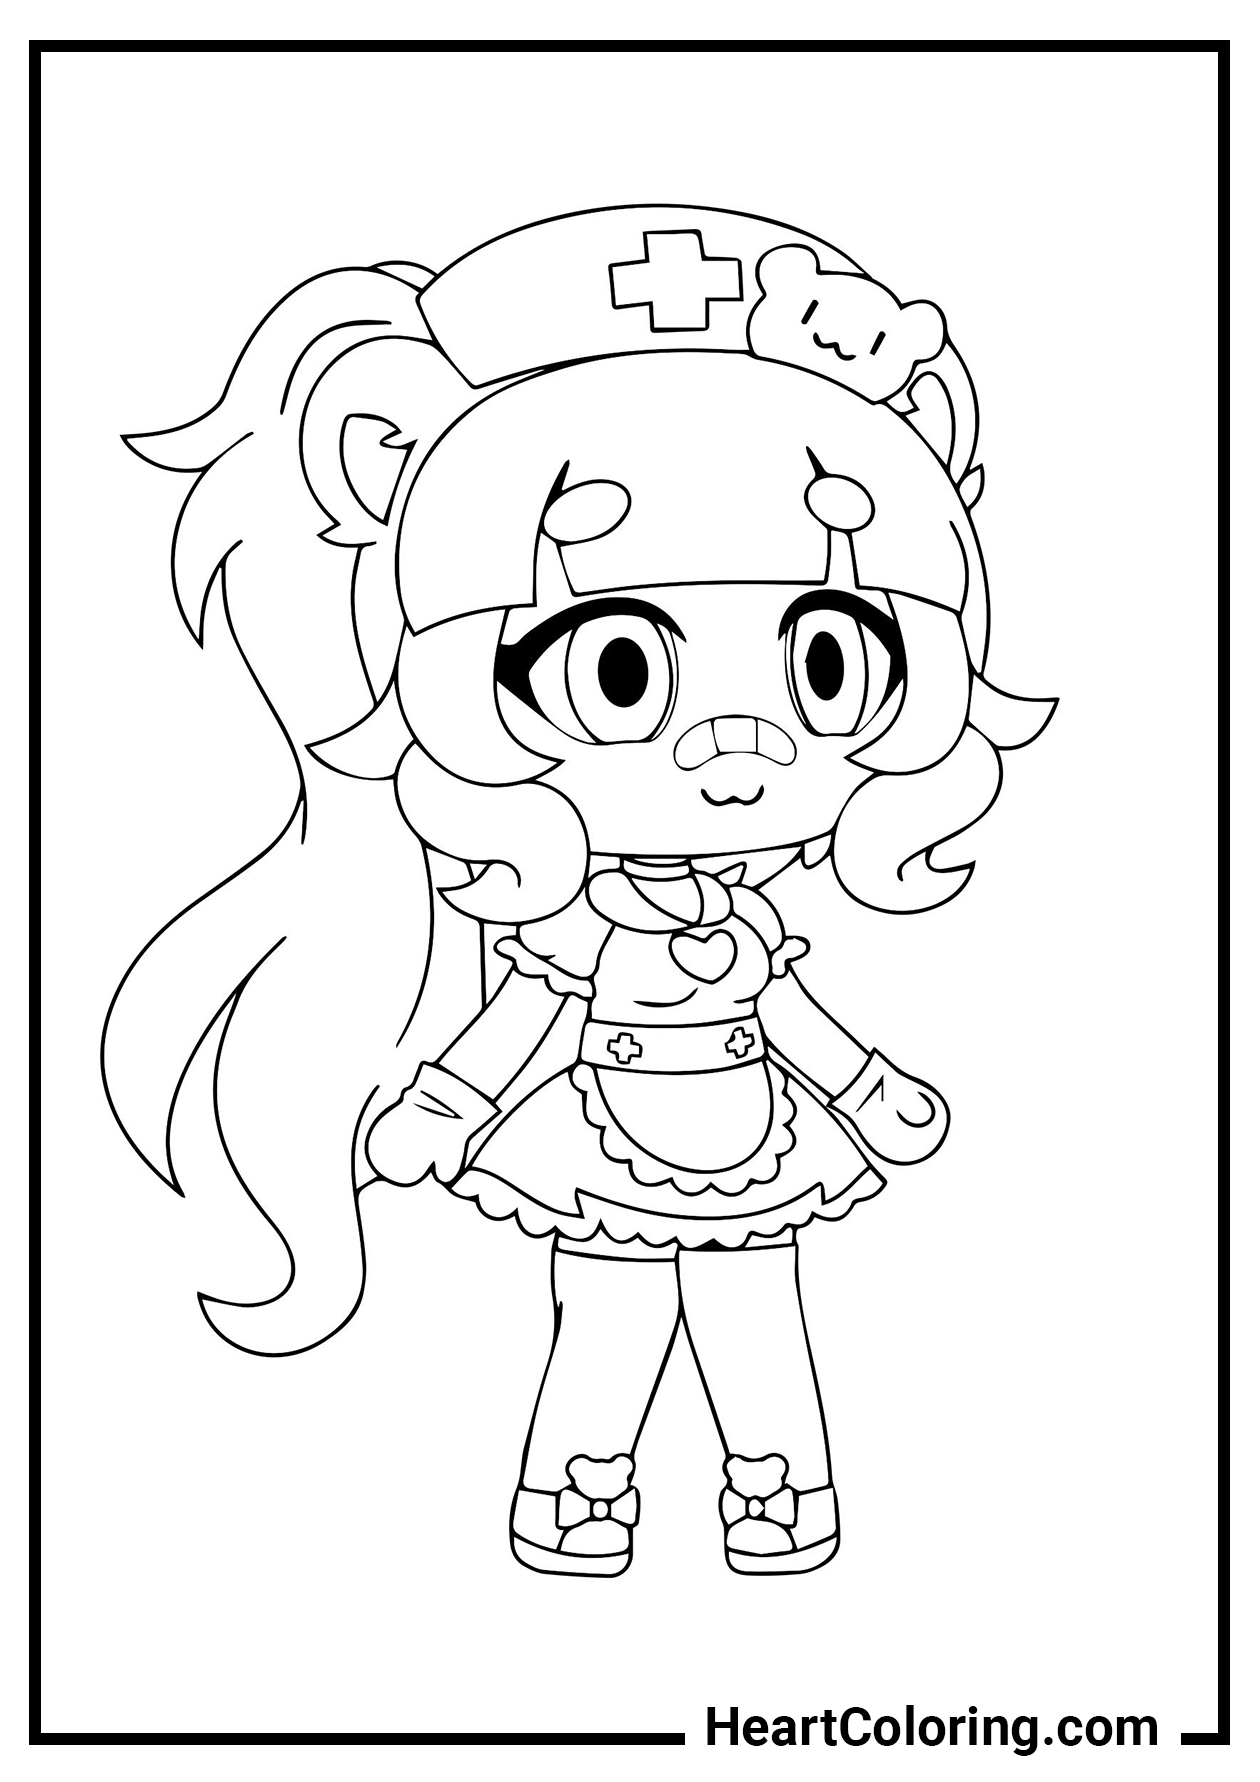 Free Printable Gacha Life Music Coloring Page, Sheet and Picture